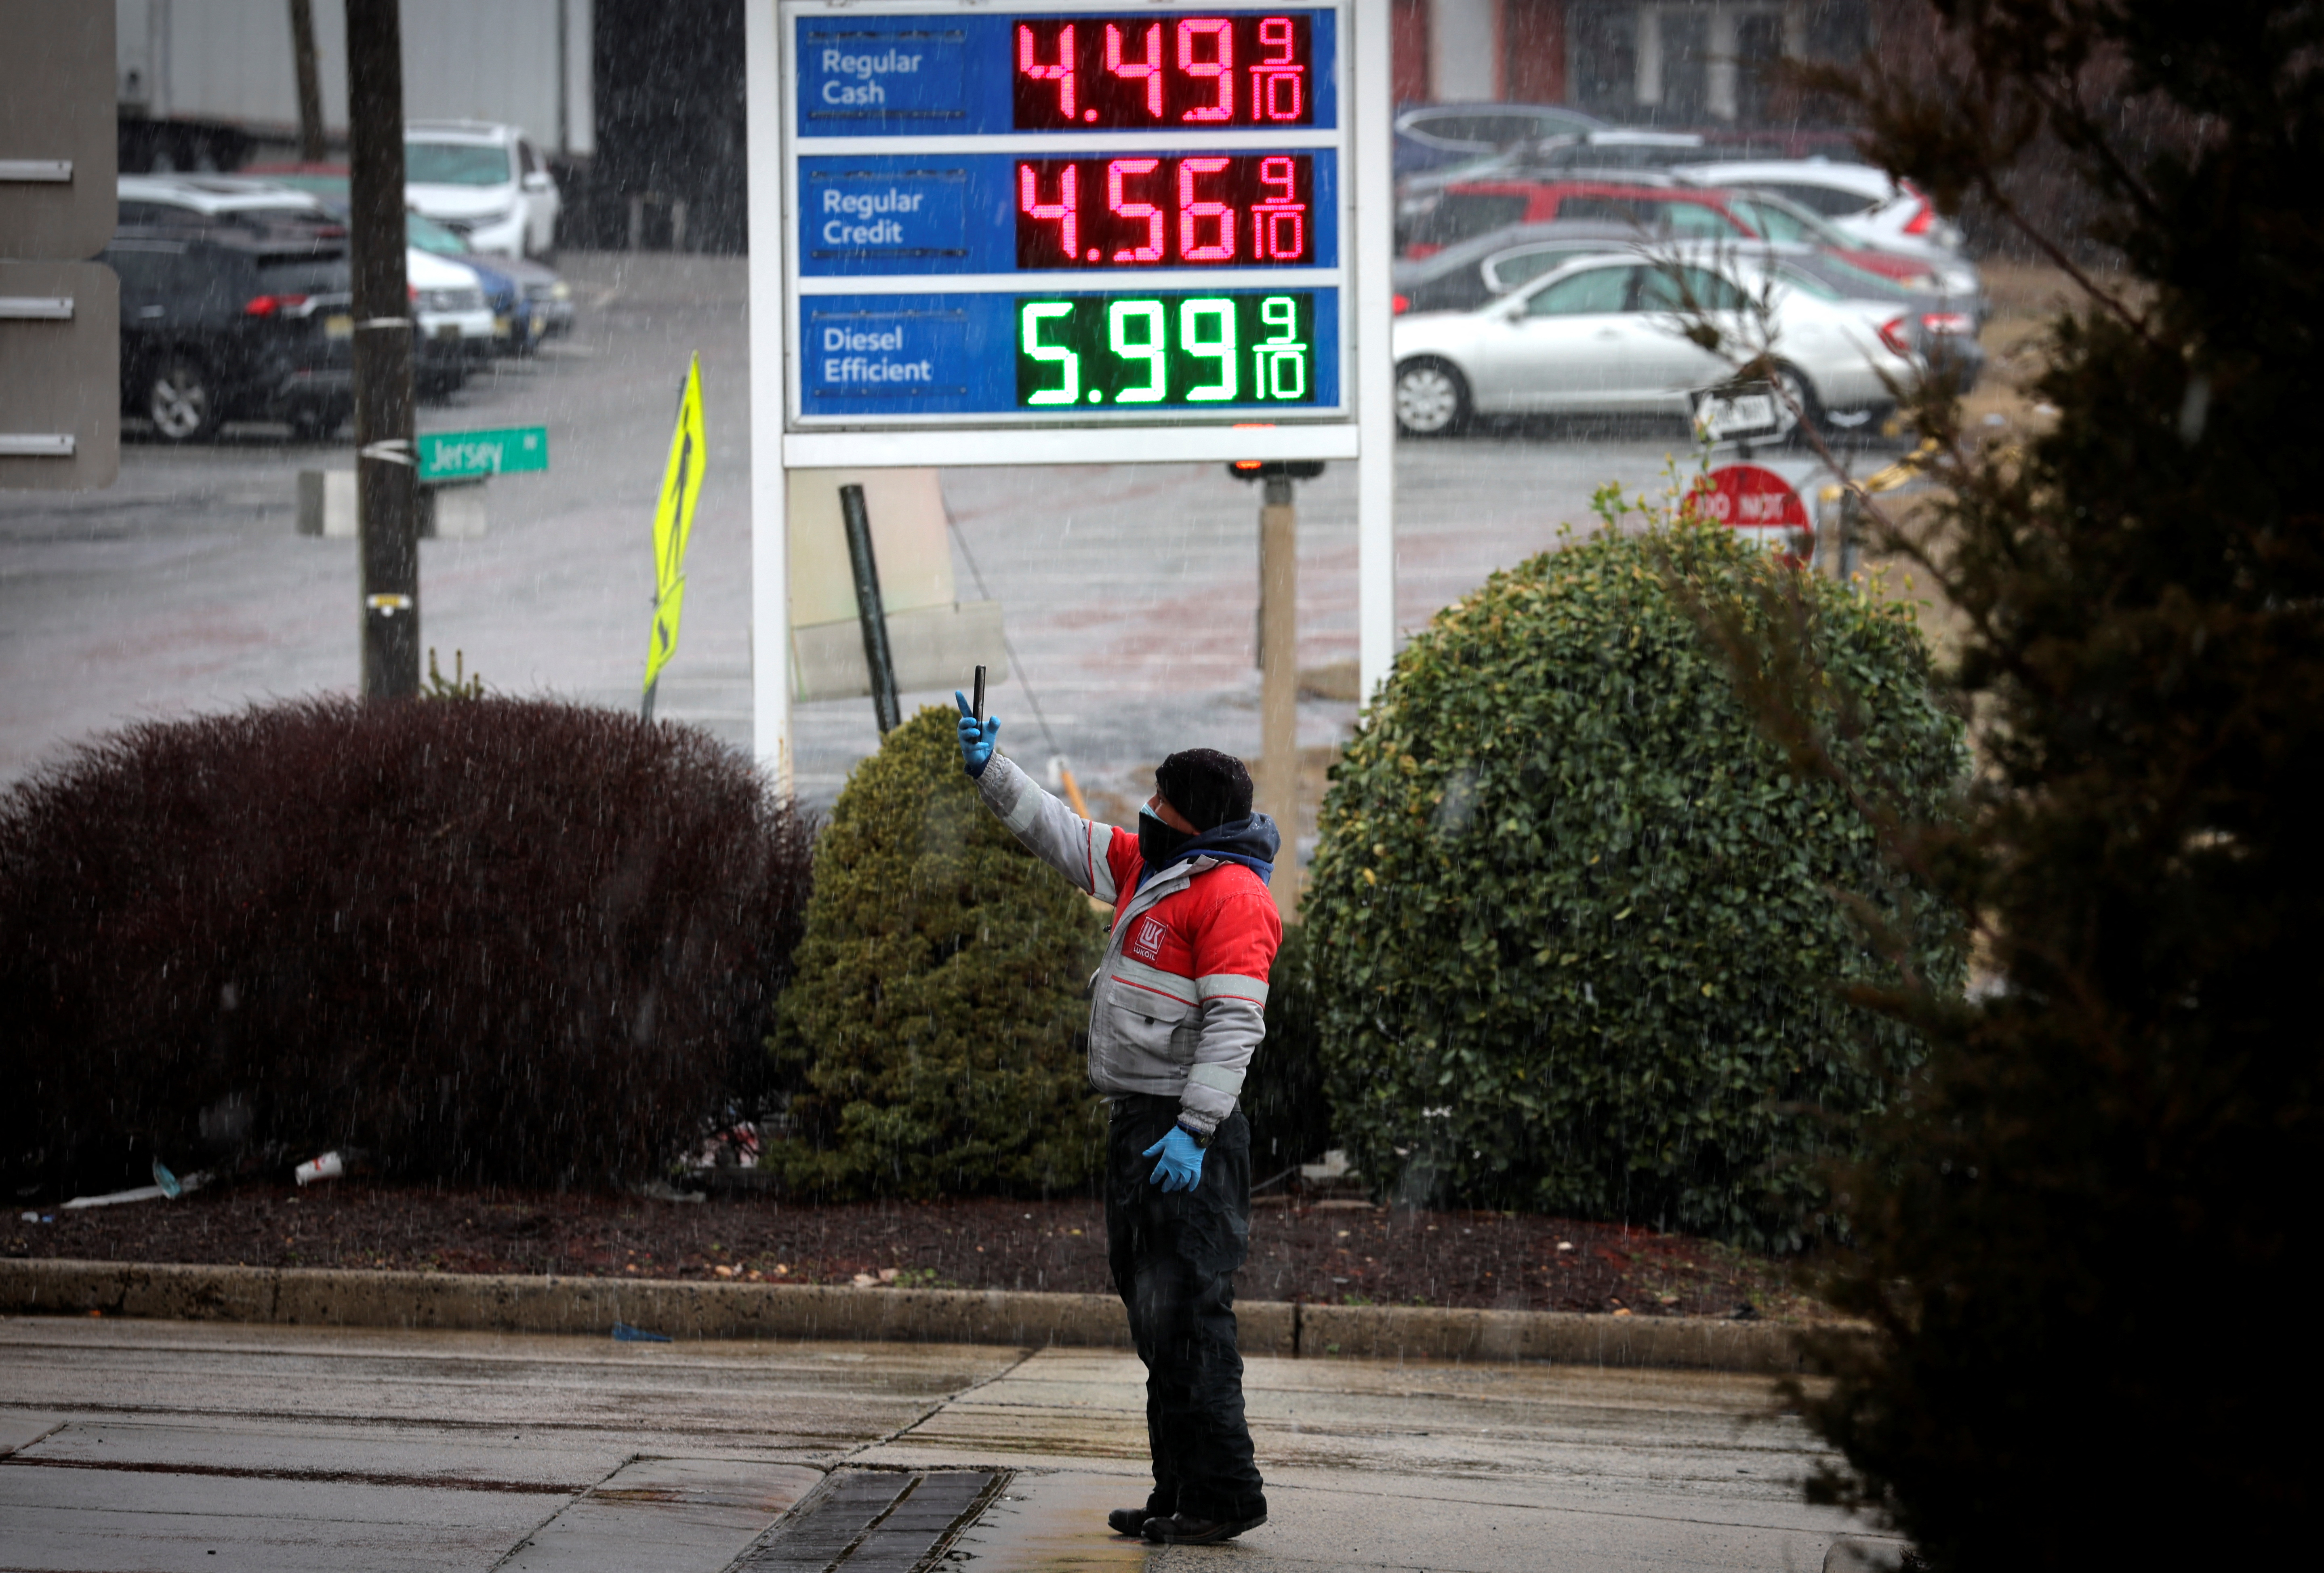 Worker takes pictures of gasoline prices at a gas station in Jersey City, New Jersey